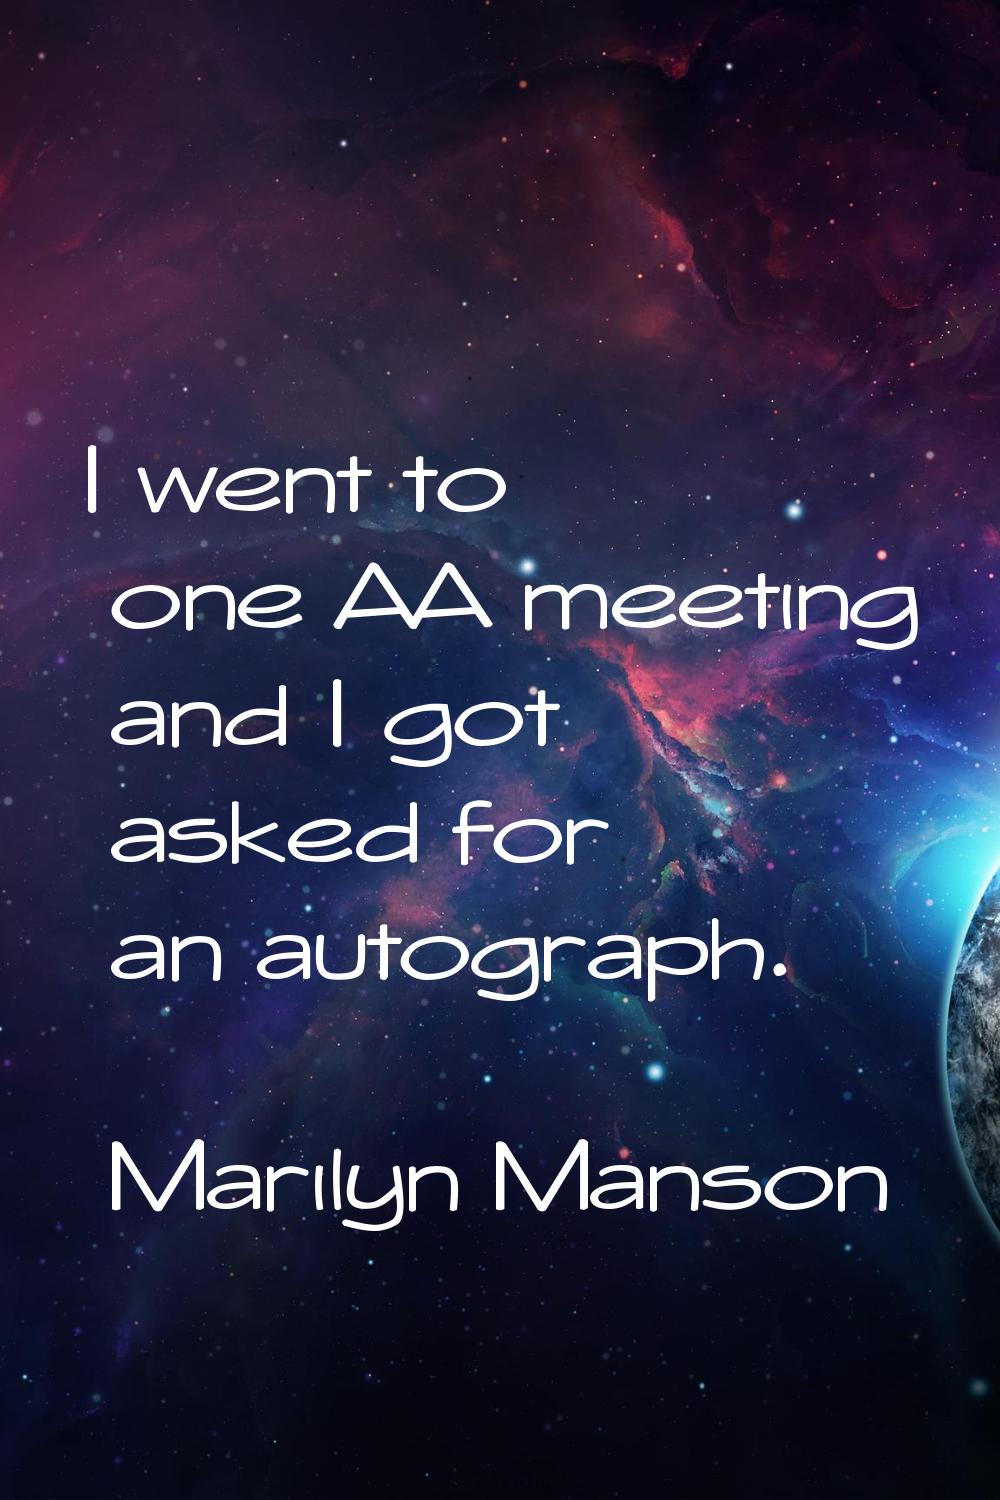 I went to one AA meeting and I got asked for an autograph.